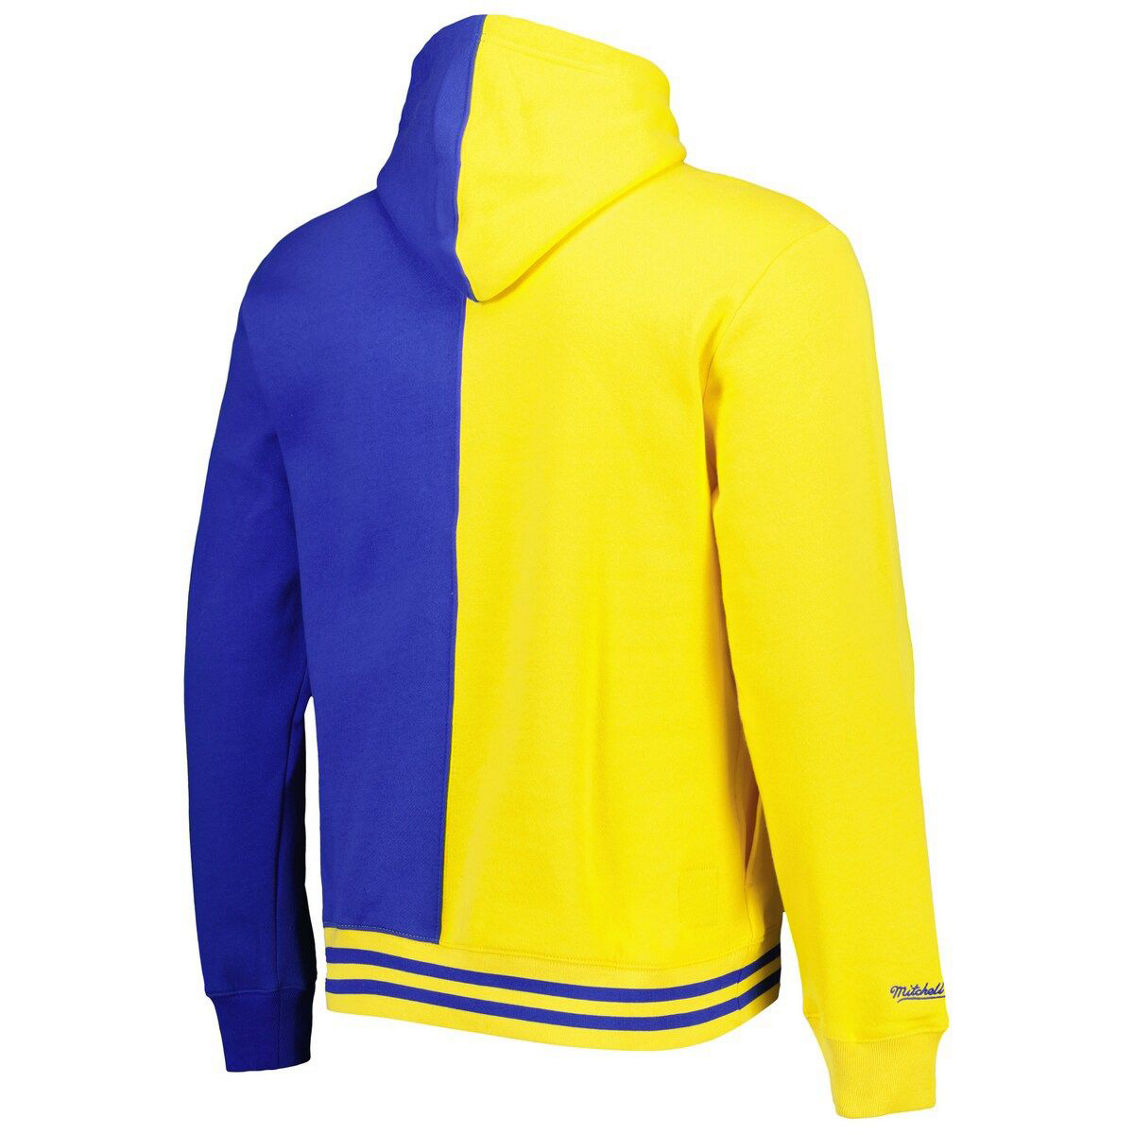 Mitchell & Ness Men's Gold/Royal Denver Nuggets Hardwood Classics Split Pullover Hoodie - Image 4 of 4